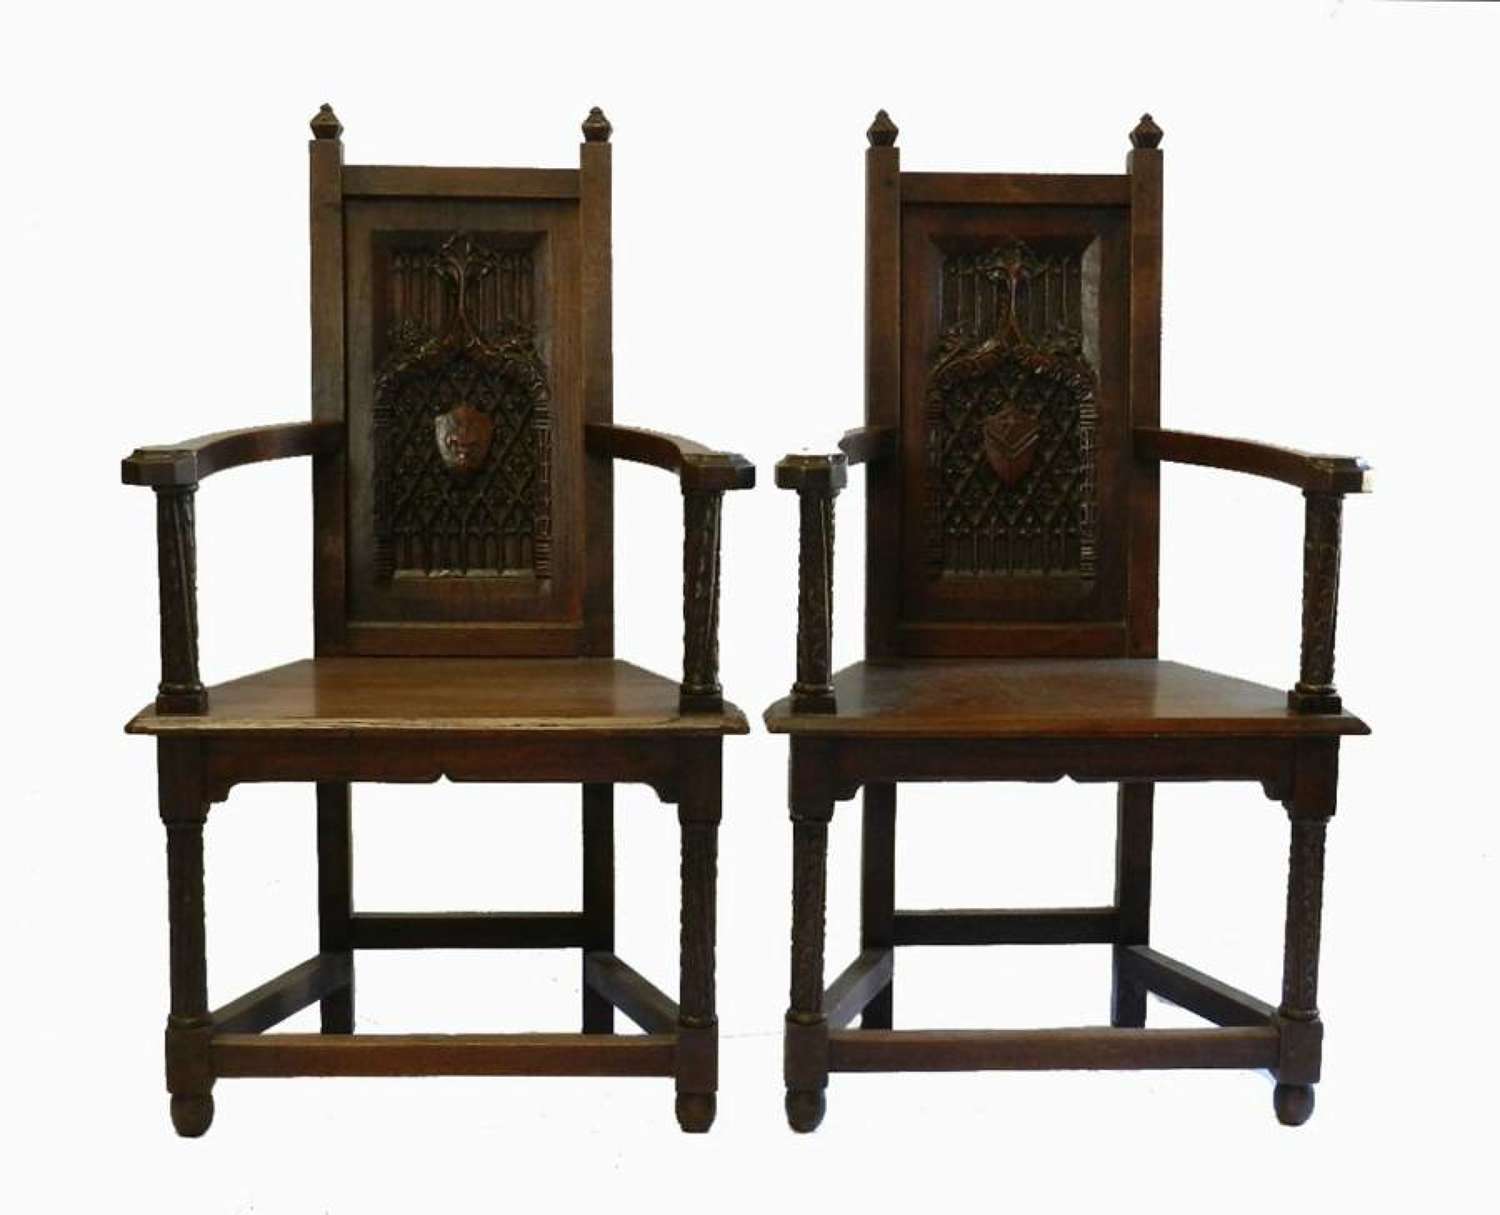 Rare Pair of French C19 Gothic Armchairs